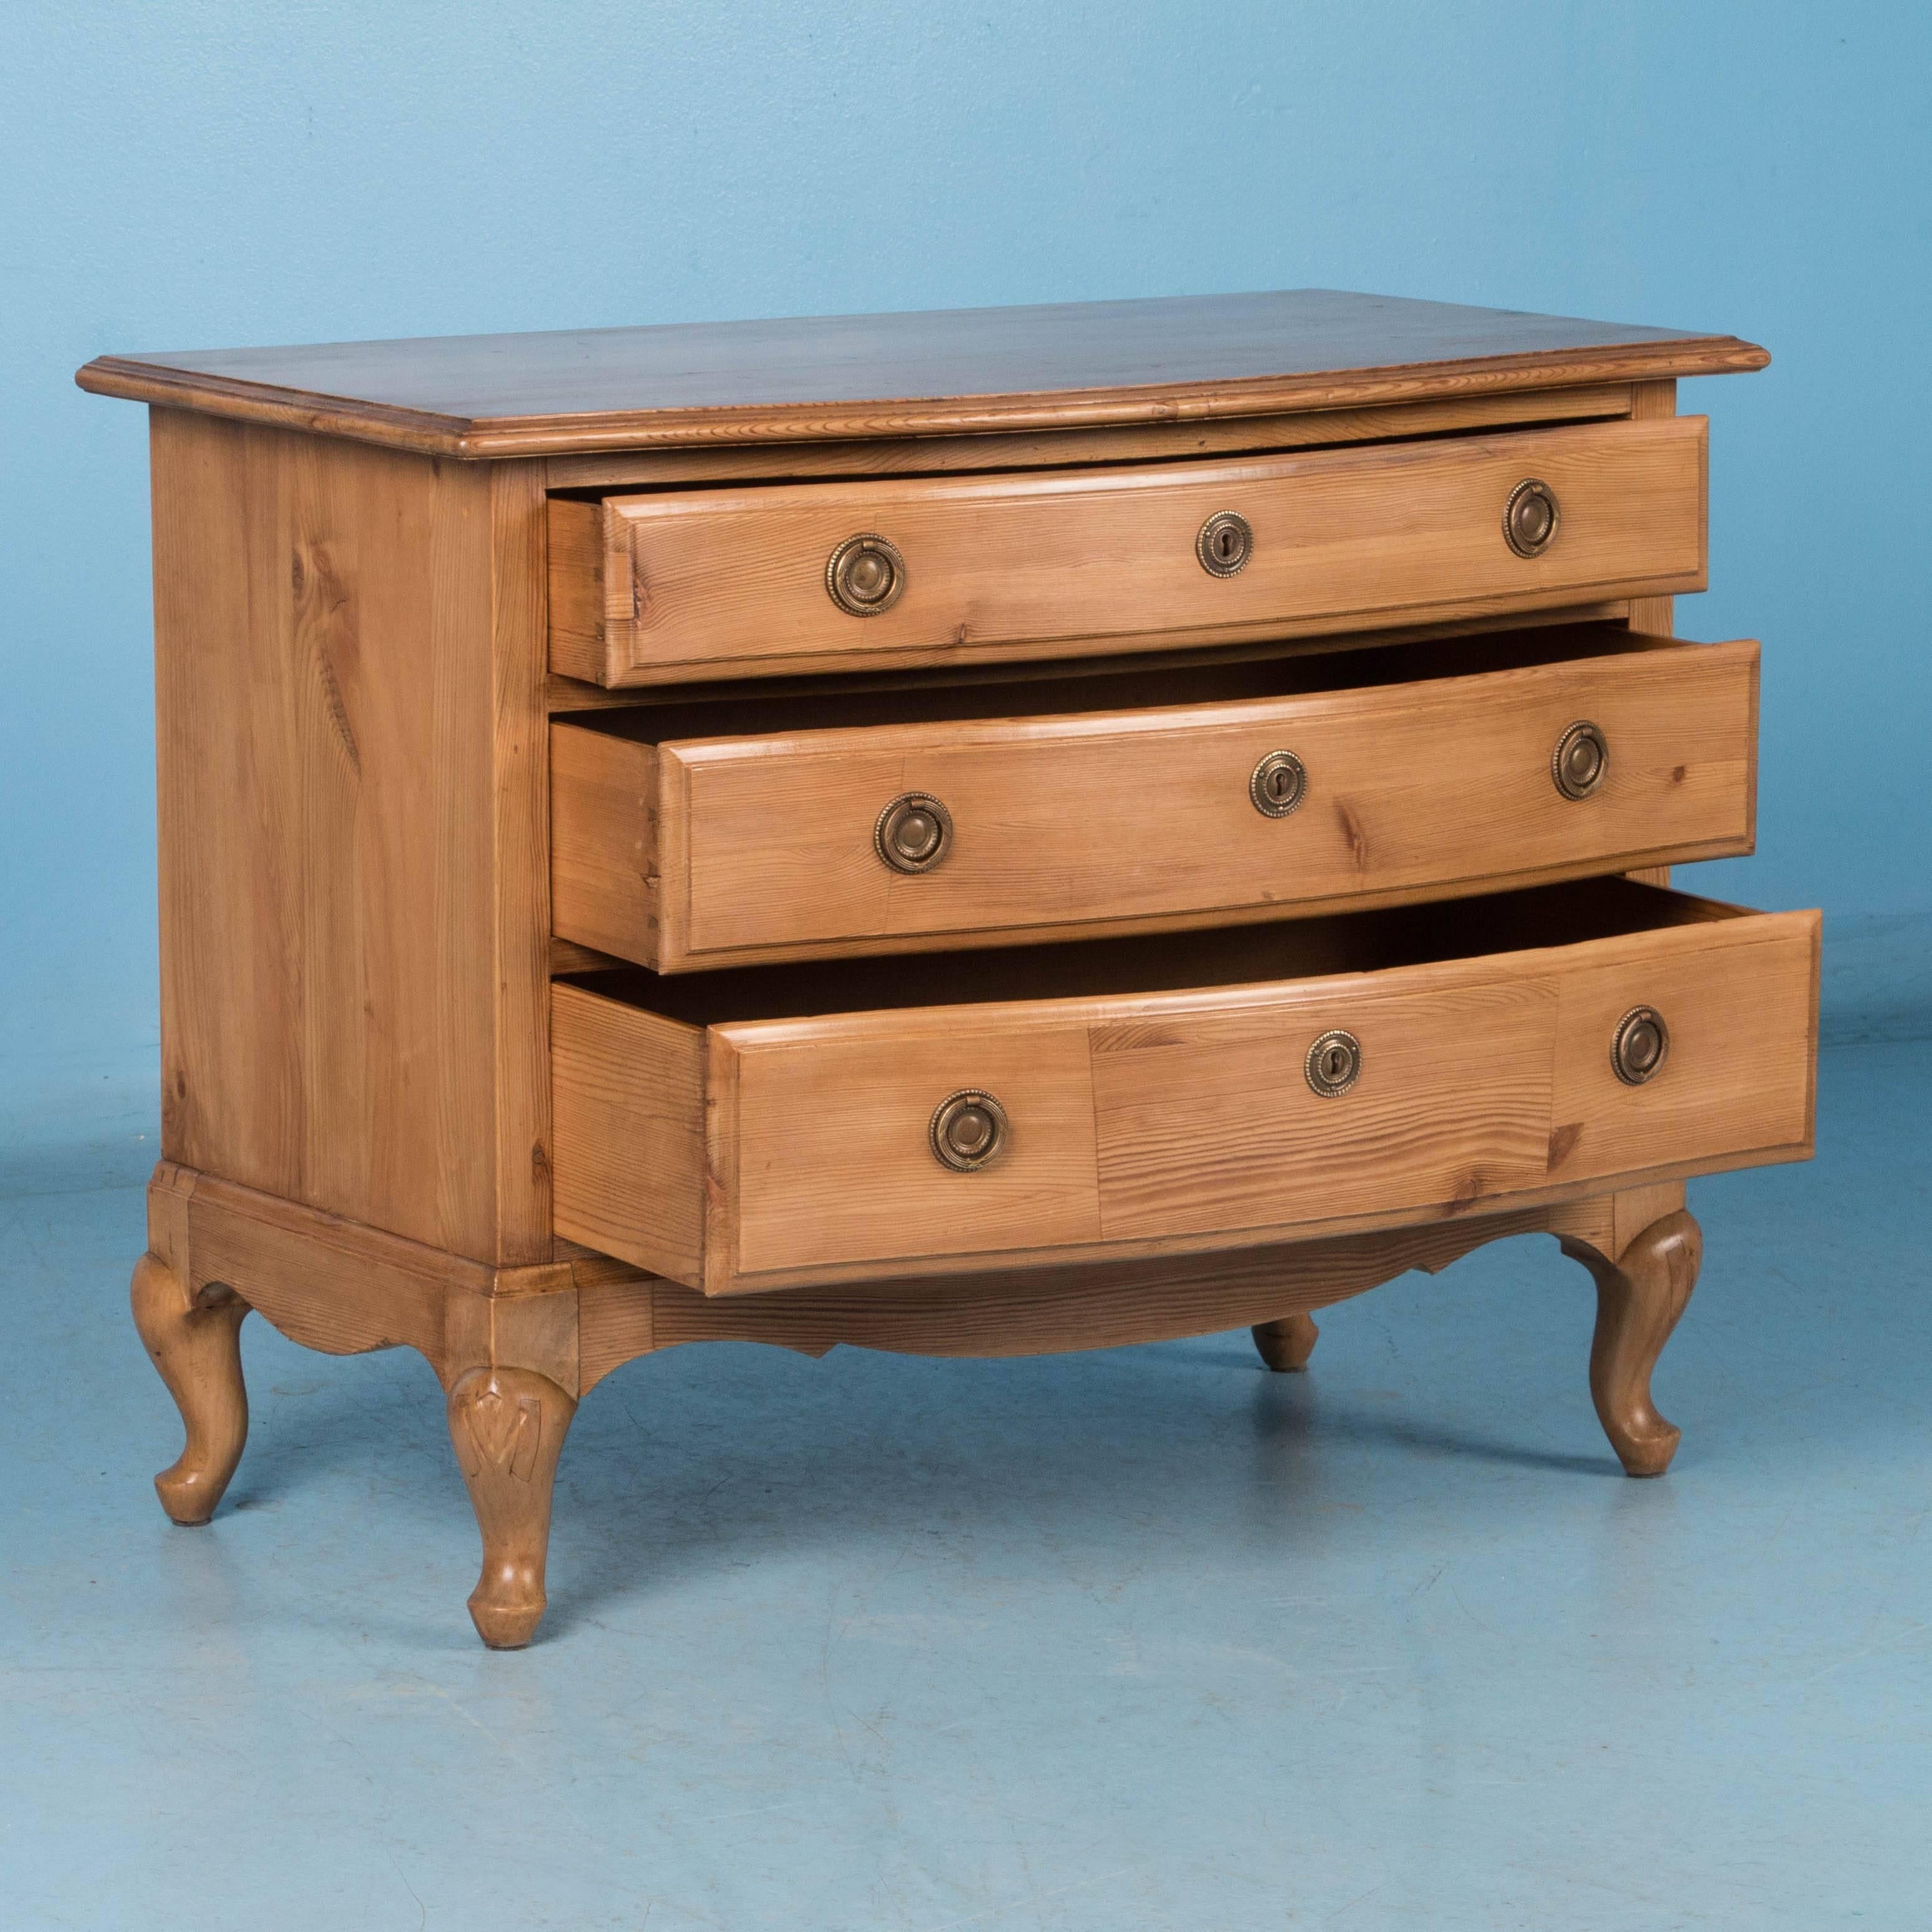 Small with lots of charm, this chest of drawers in natural pine has been given a waxed finish, bringing out the warmth of the wood. It features a slightly bowed front with three graduated drawers, brass hardware and carved cabriole legs. The case is